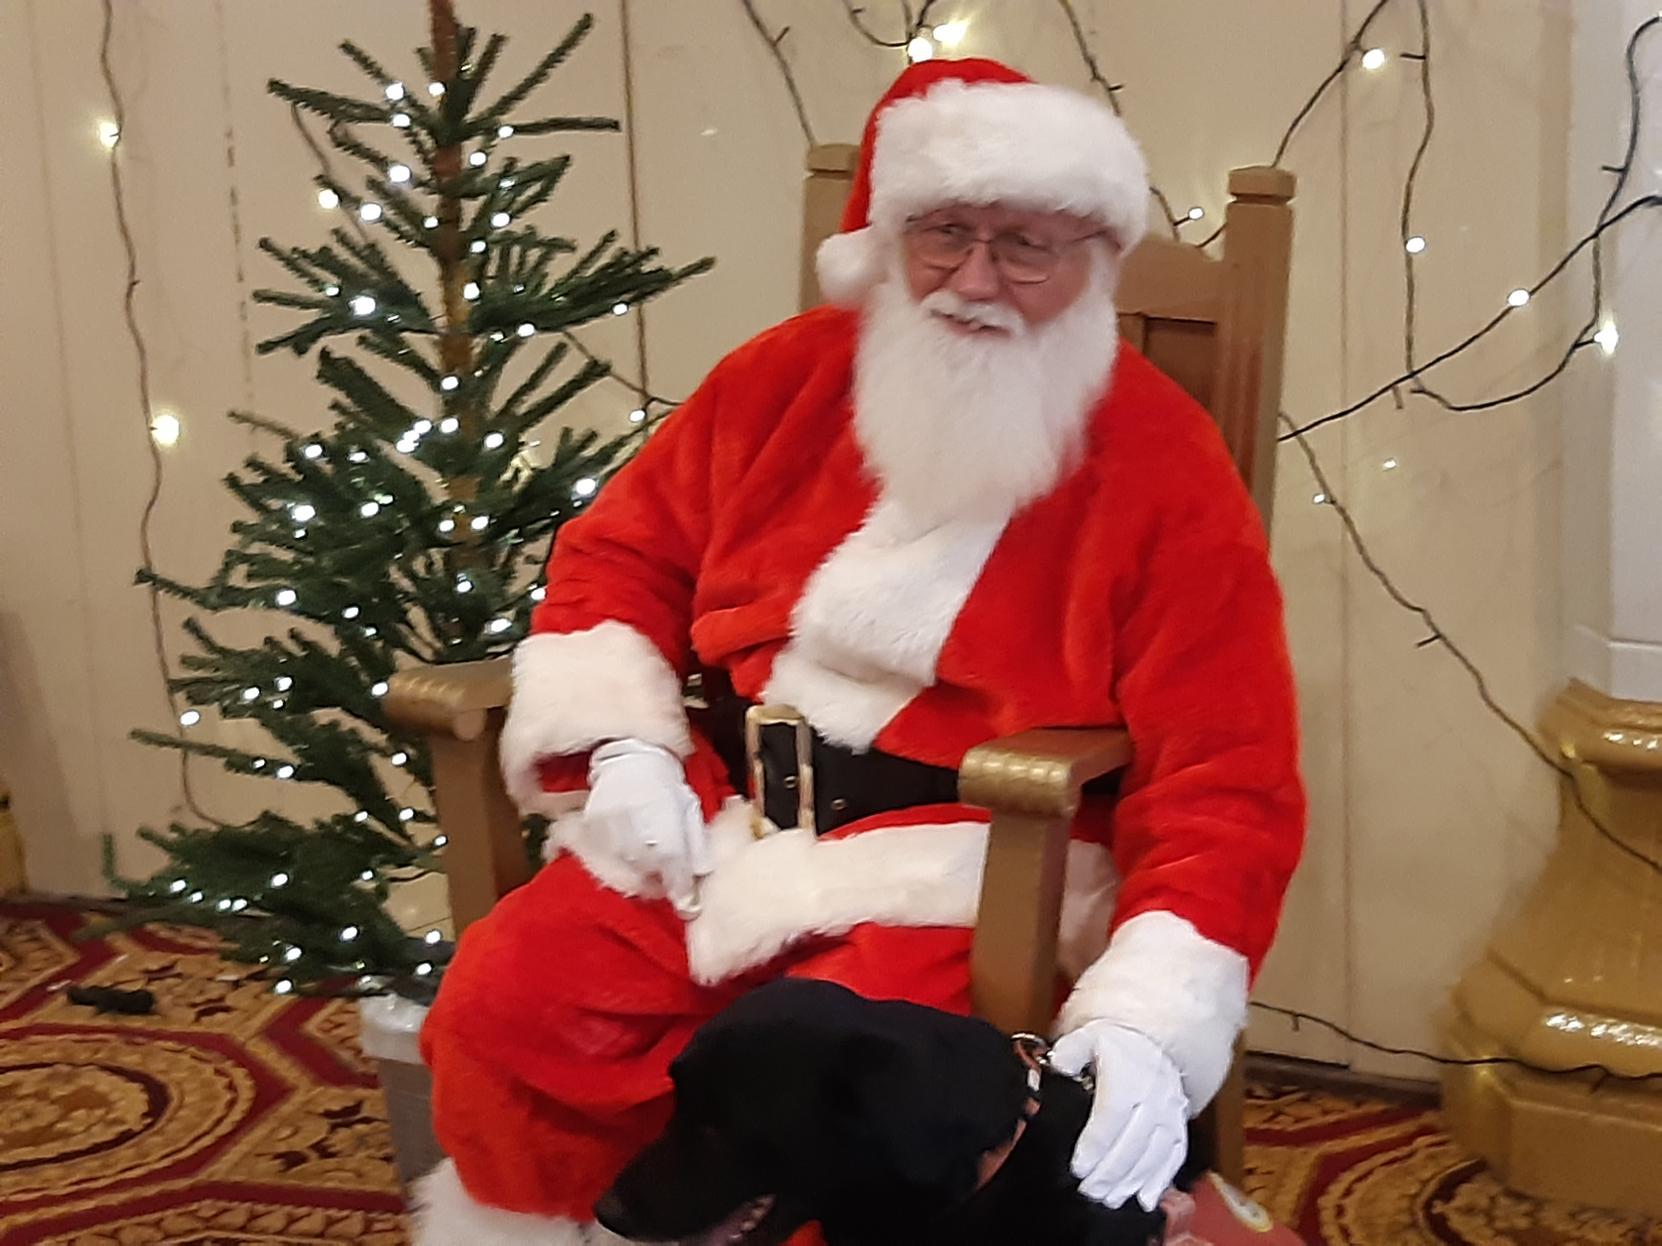 What Christmas event would be complete without a visit from Santa Claus?